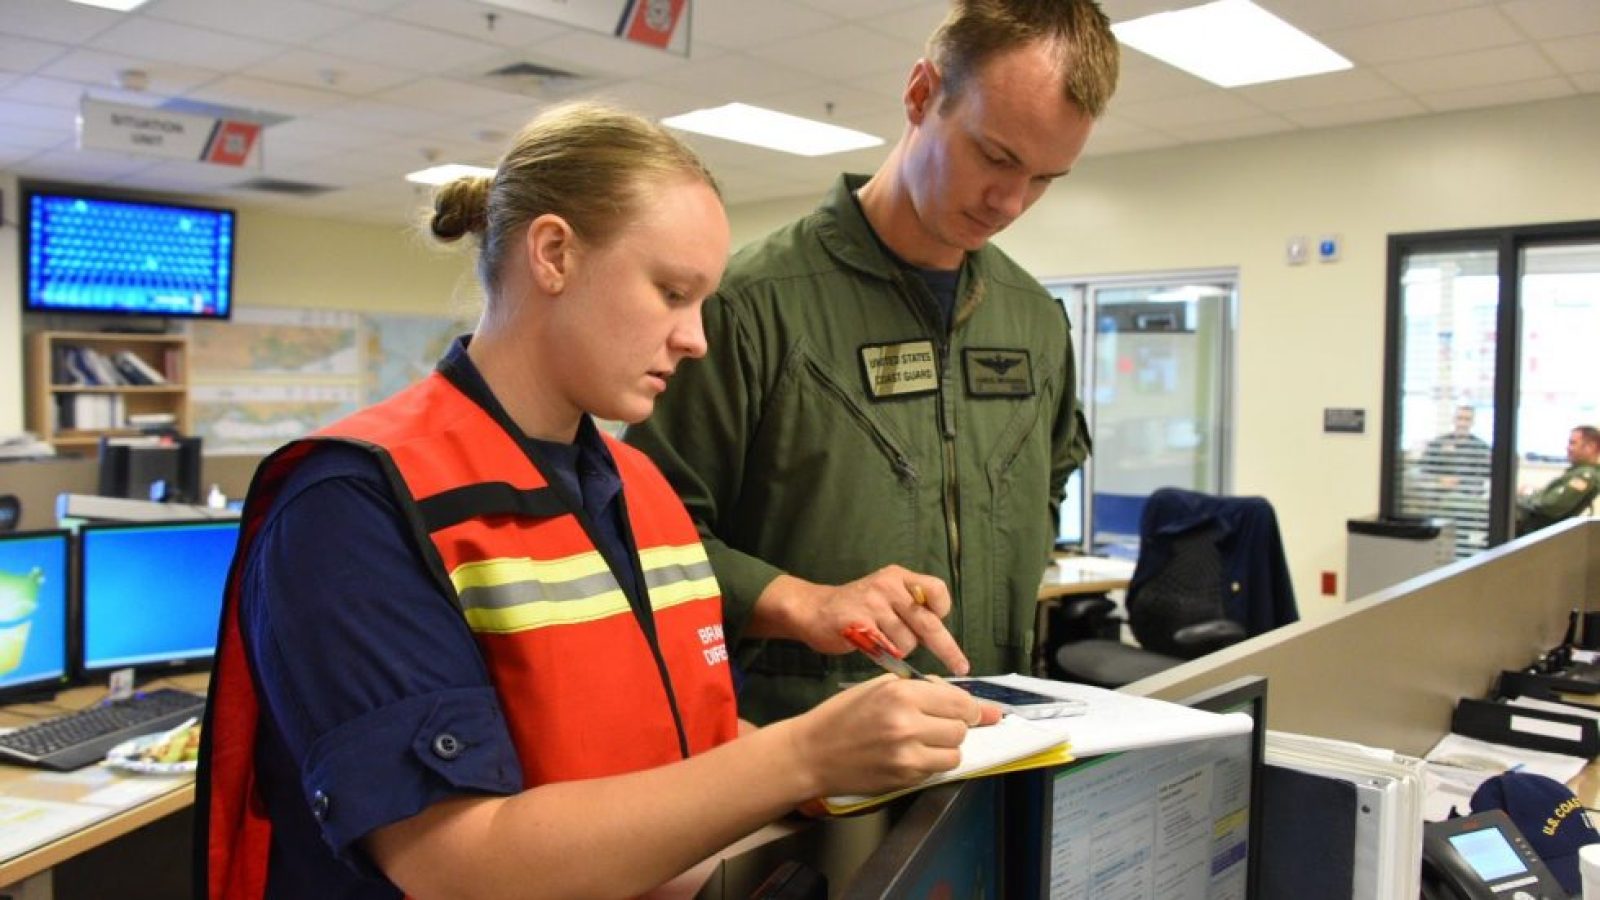 McCafferty (left) works on an assignment during her service with the Coast Guard.